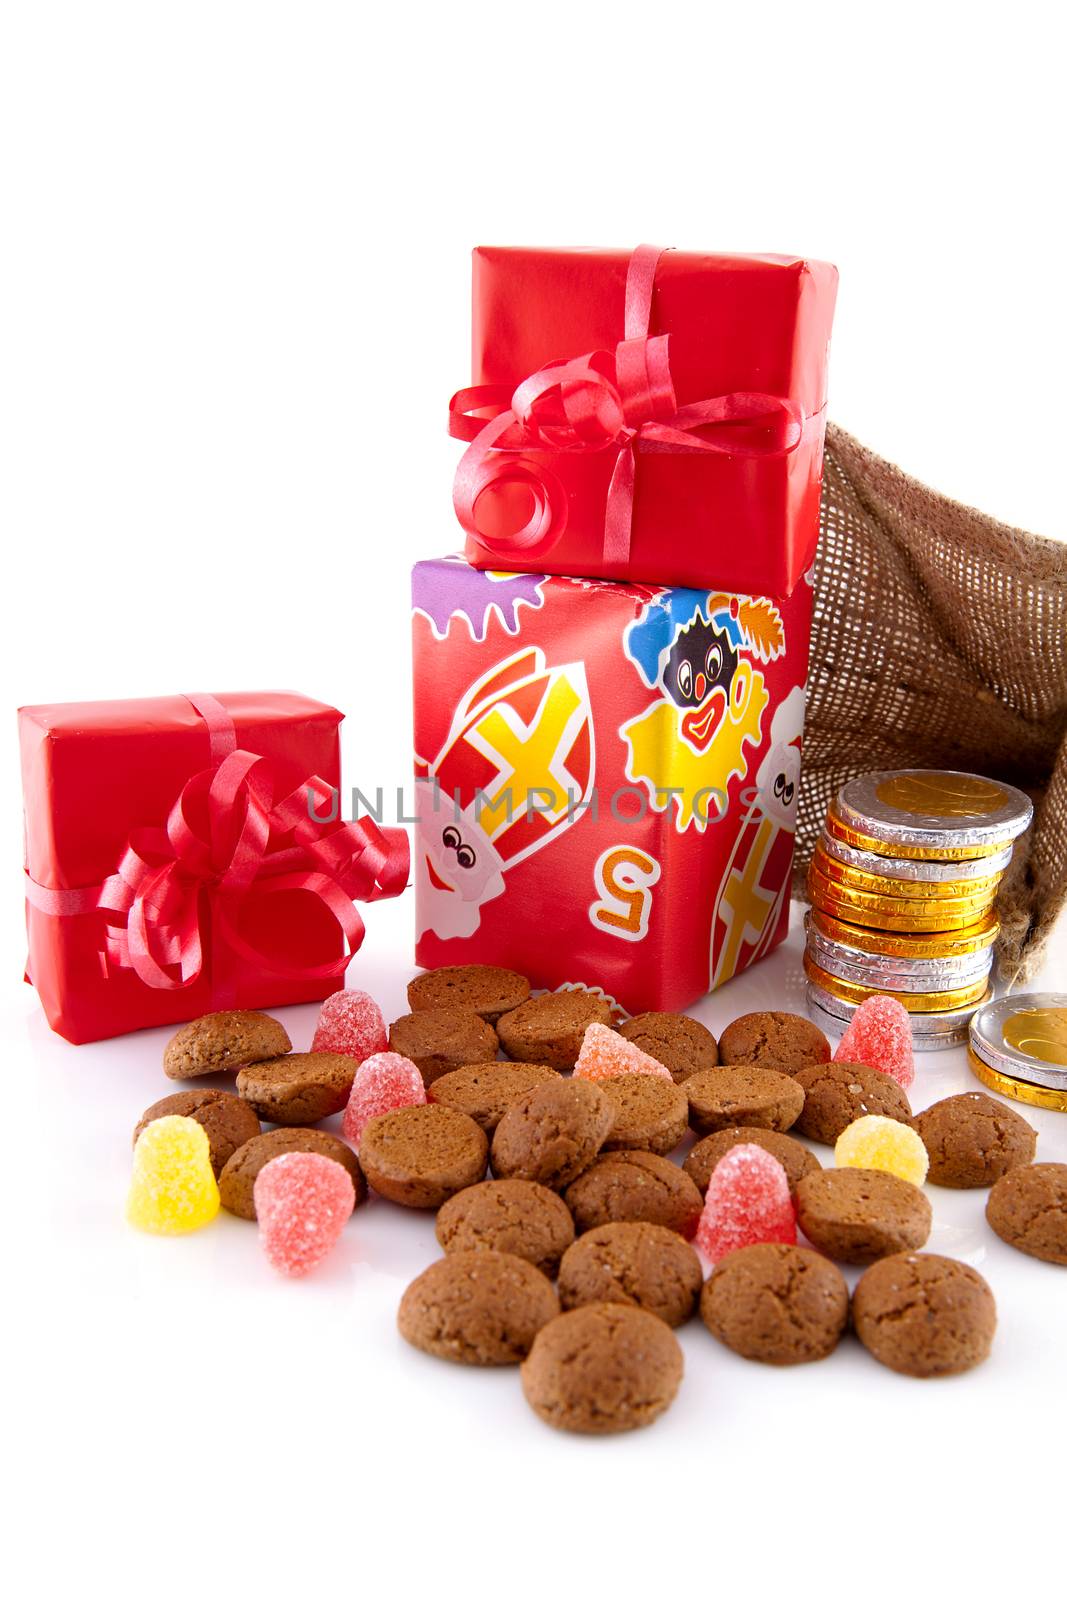 Typical Dutch celebration: Sinterklaas with surprises in bag and ginger nuts, ready for the kids in december. Isolated on white background